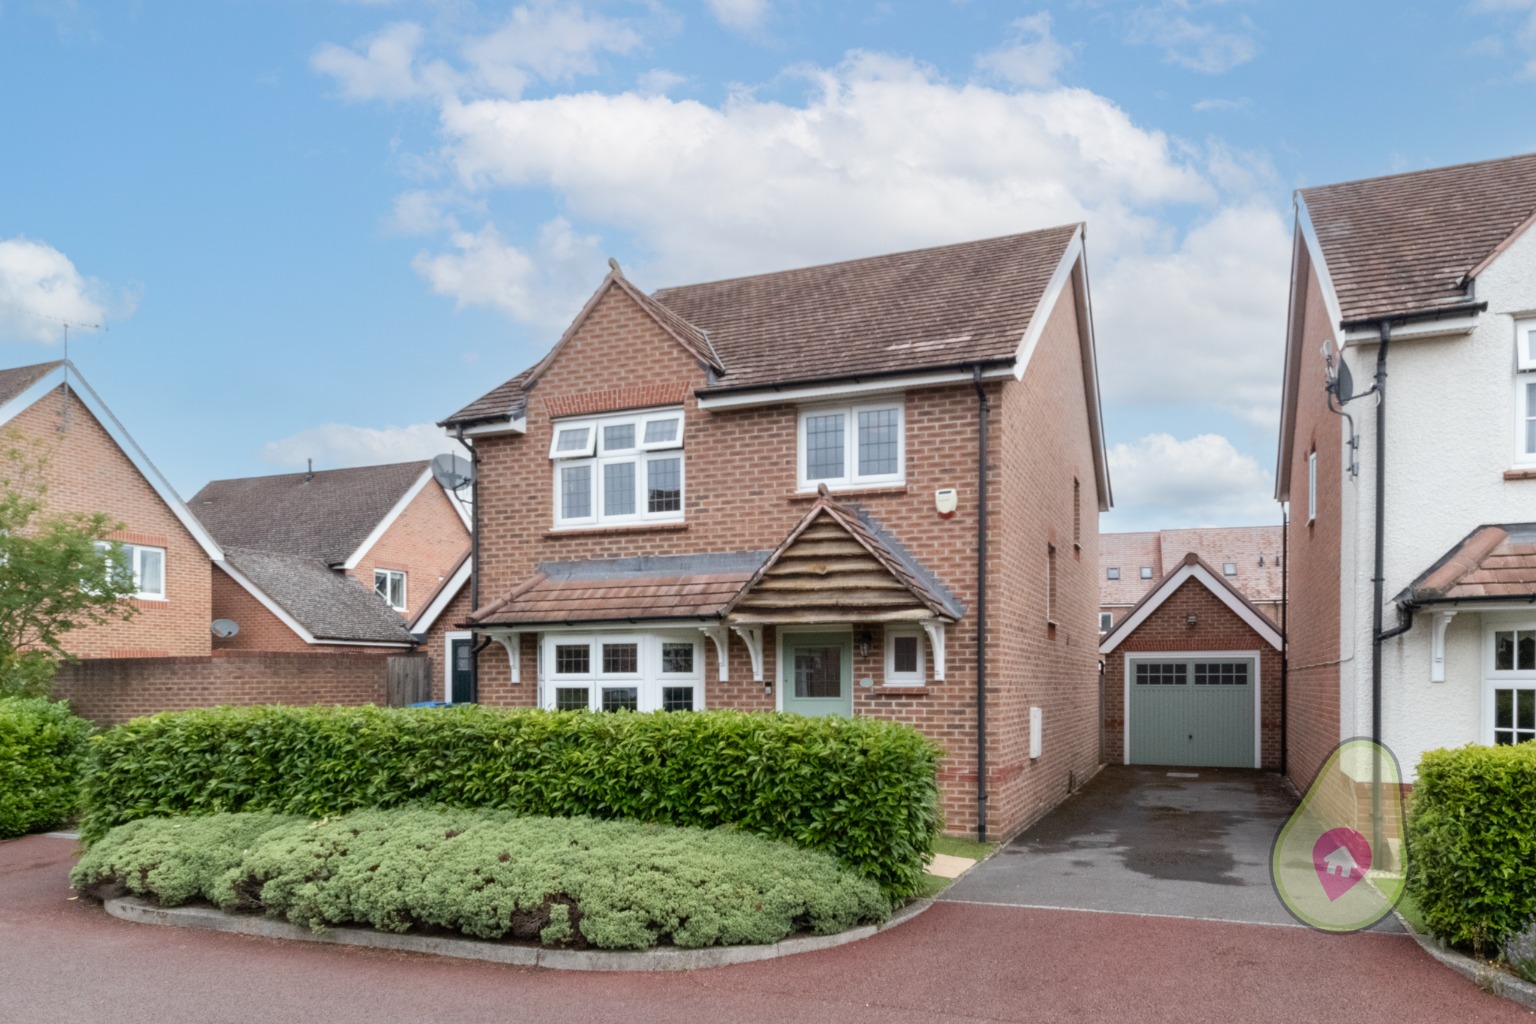 4 bed detached house for sale in Bunting Lane, Bracknell - Property Image 1